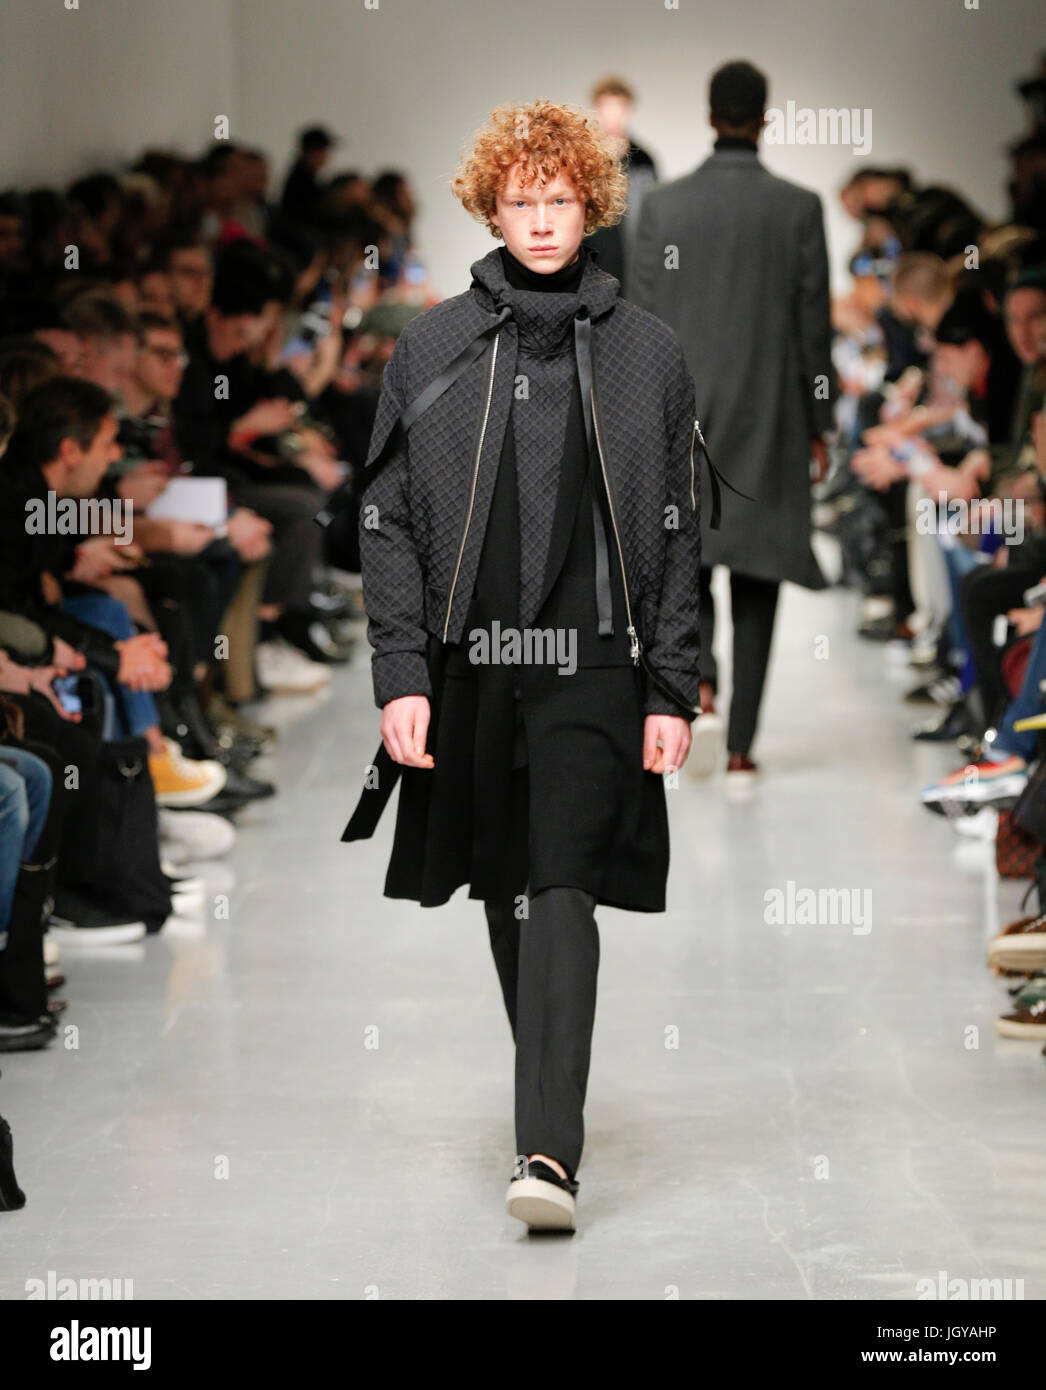 Fashion catwalk at London Week Mens Autumn Winter 2017 presented by Matthew Miller models British Fashion Council Show Space Stock Photo - Alamy